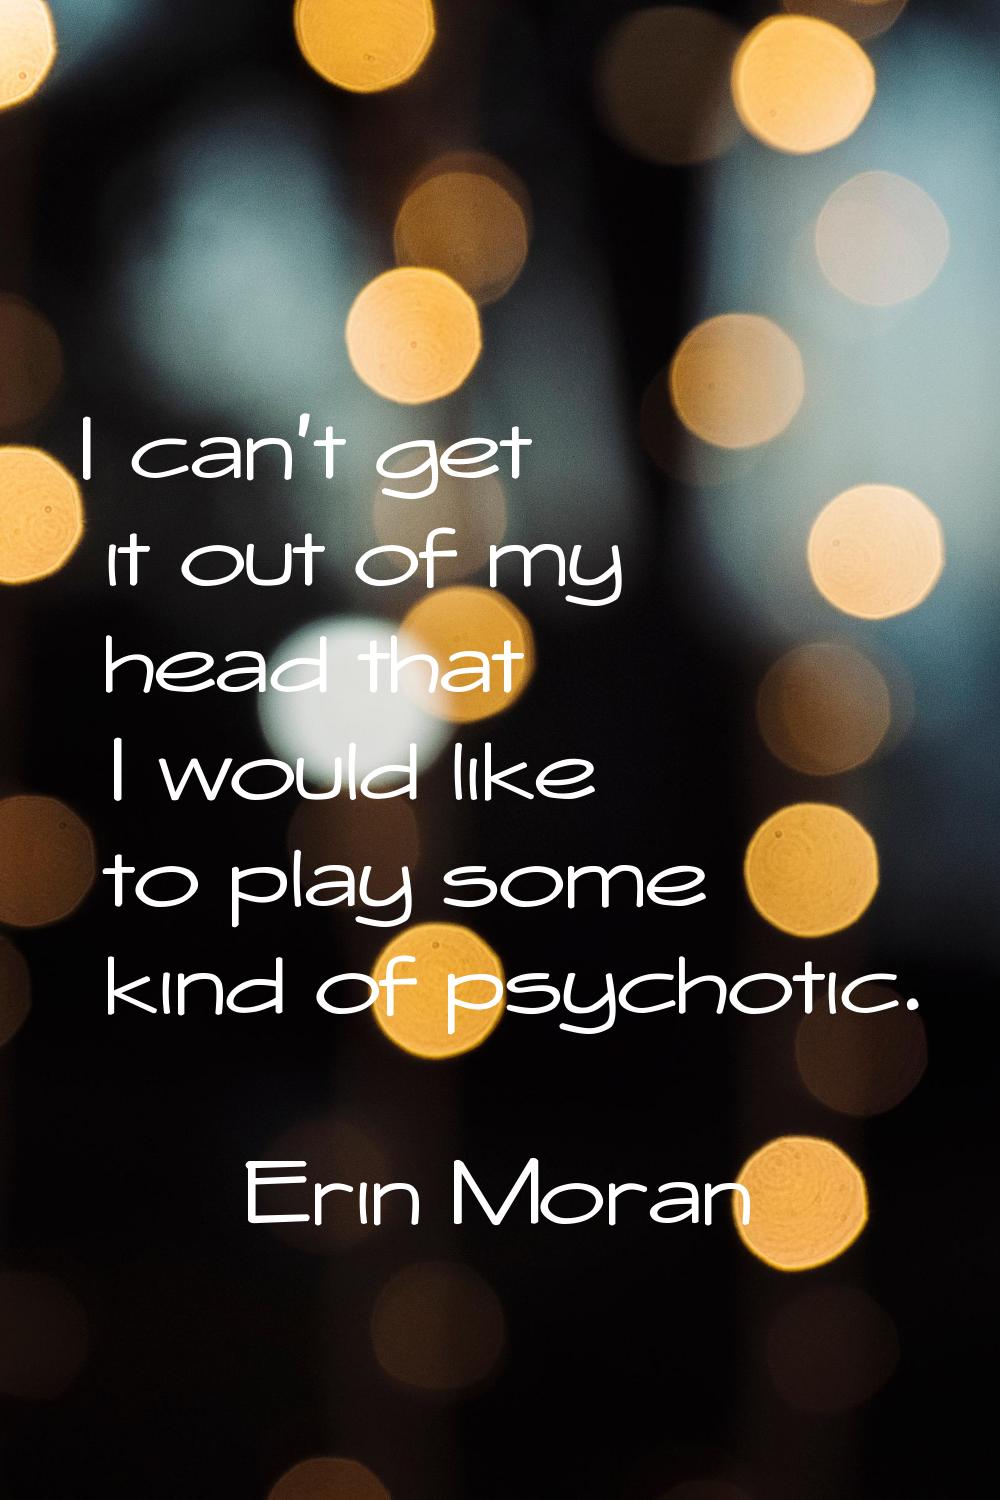 I can't get it out of my head that I would like to play some kind of psychotic.